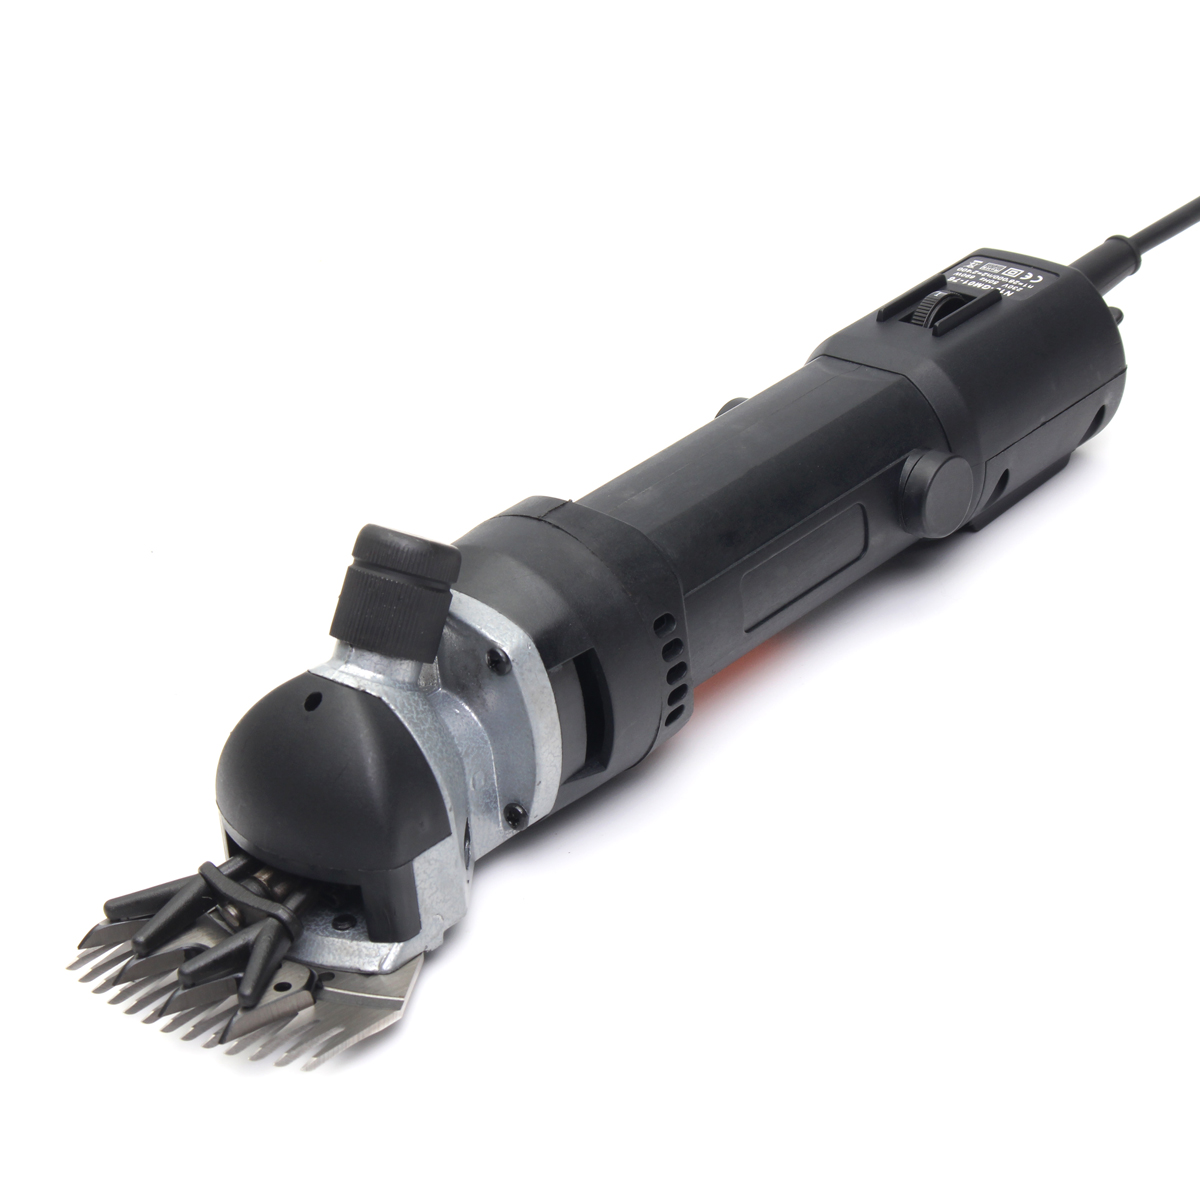 

6 Speeds Electric Sheep Clippers 690W Electric Shears Shearing Clipper Grooming Haircut Trimmer